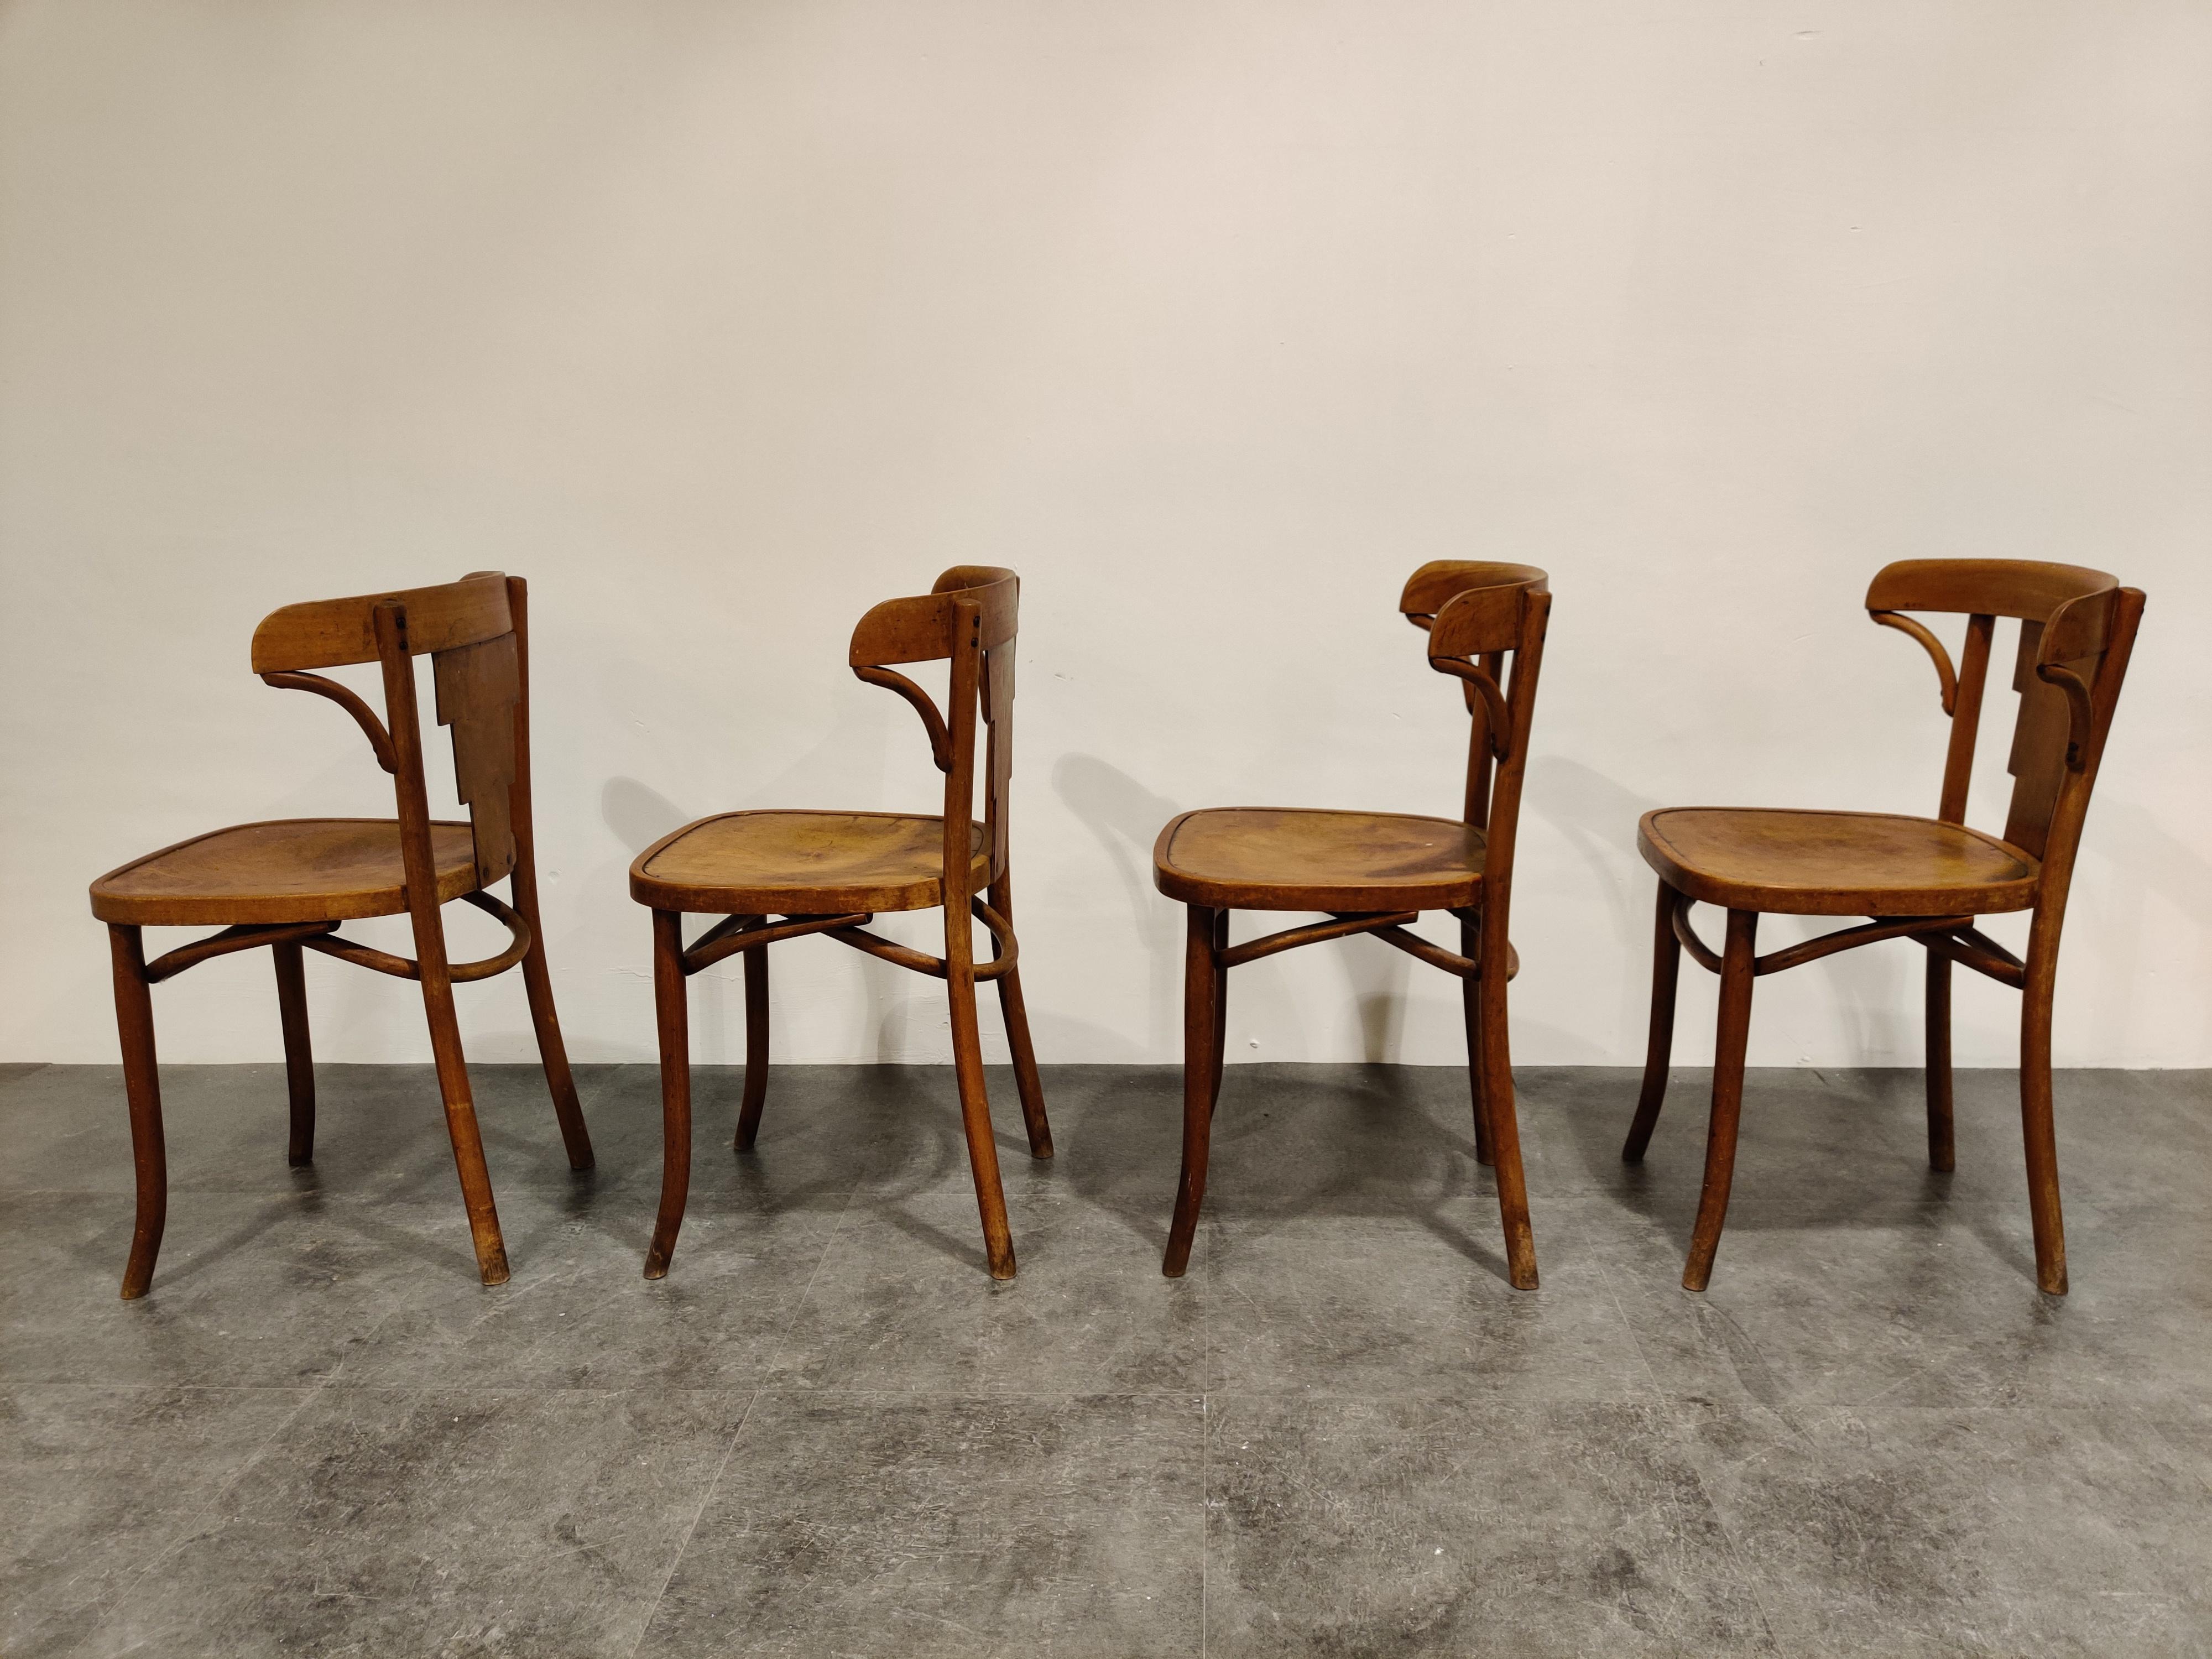 Estonian Set of 4 Vintage Bistro Chairs by Luterma, 1920s